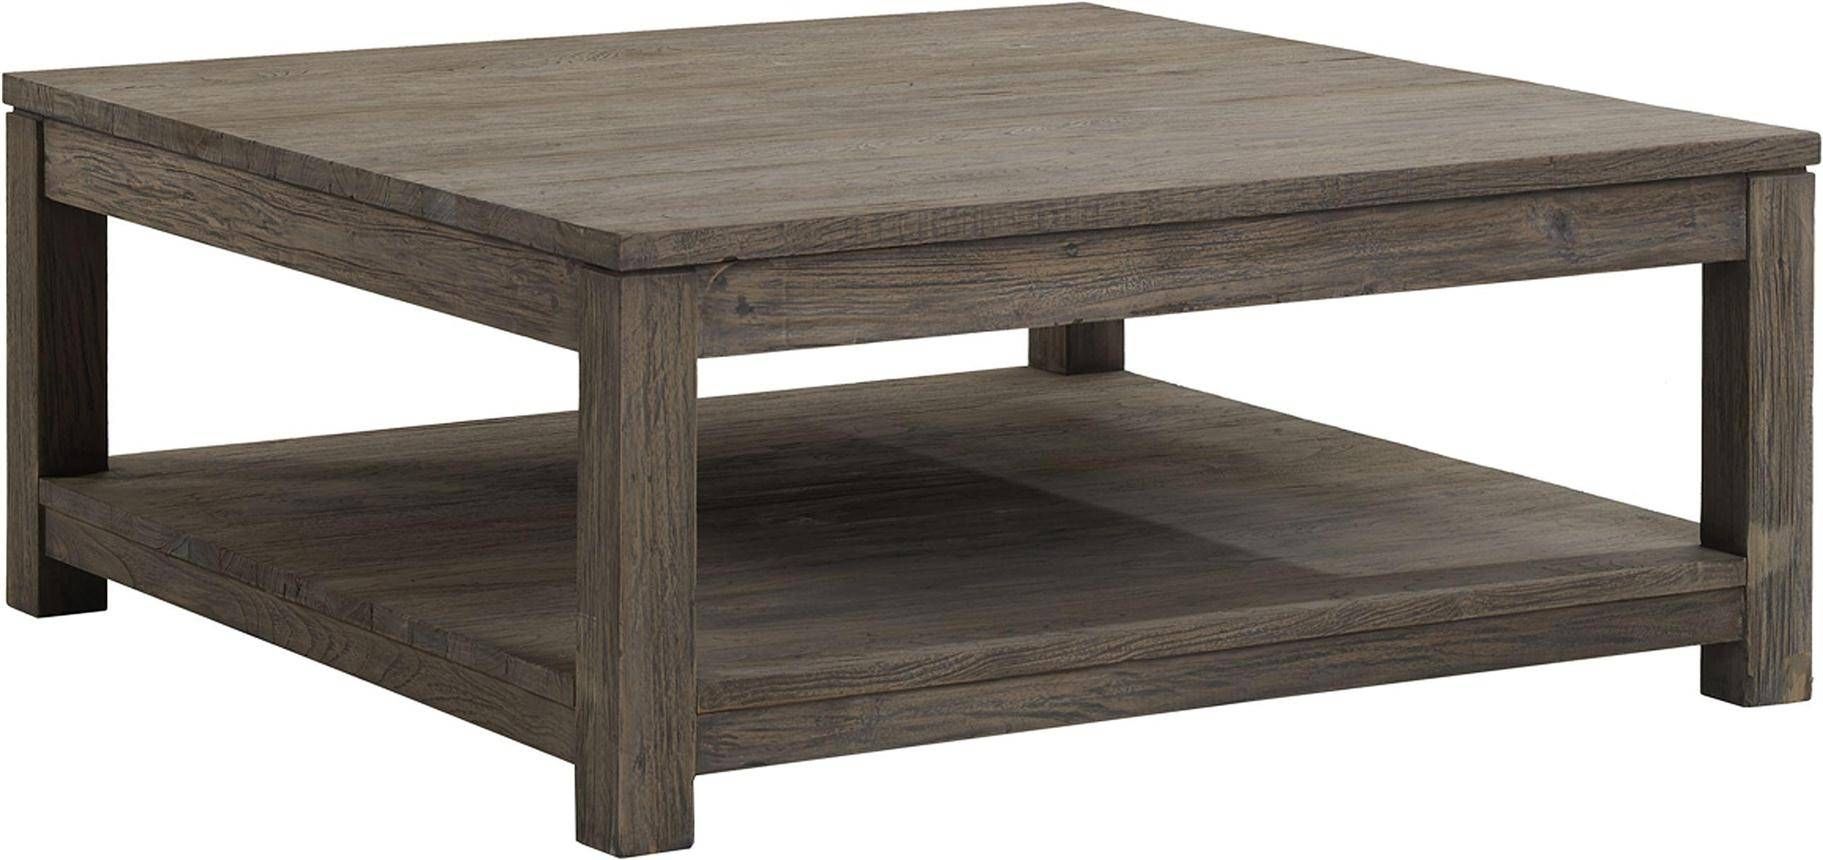 Coffee Tables: Charming Square Coffee Tables Ideas 48" Square With Square Wood Coffee Tables With Storage (View 12 of 30)